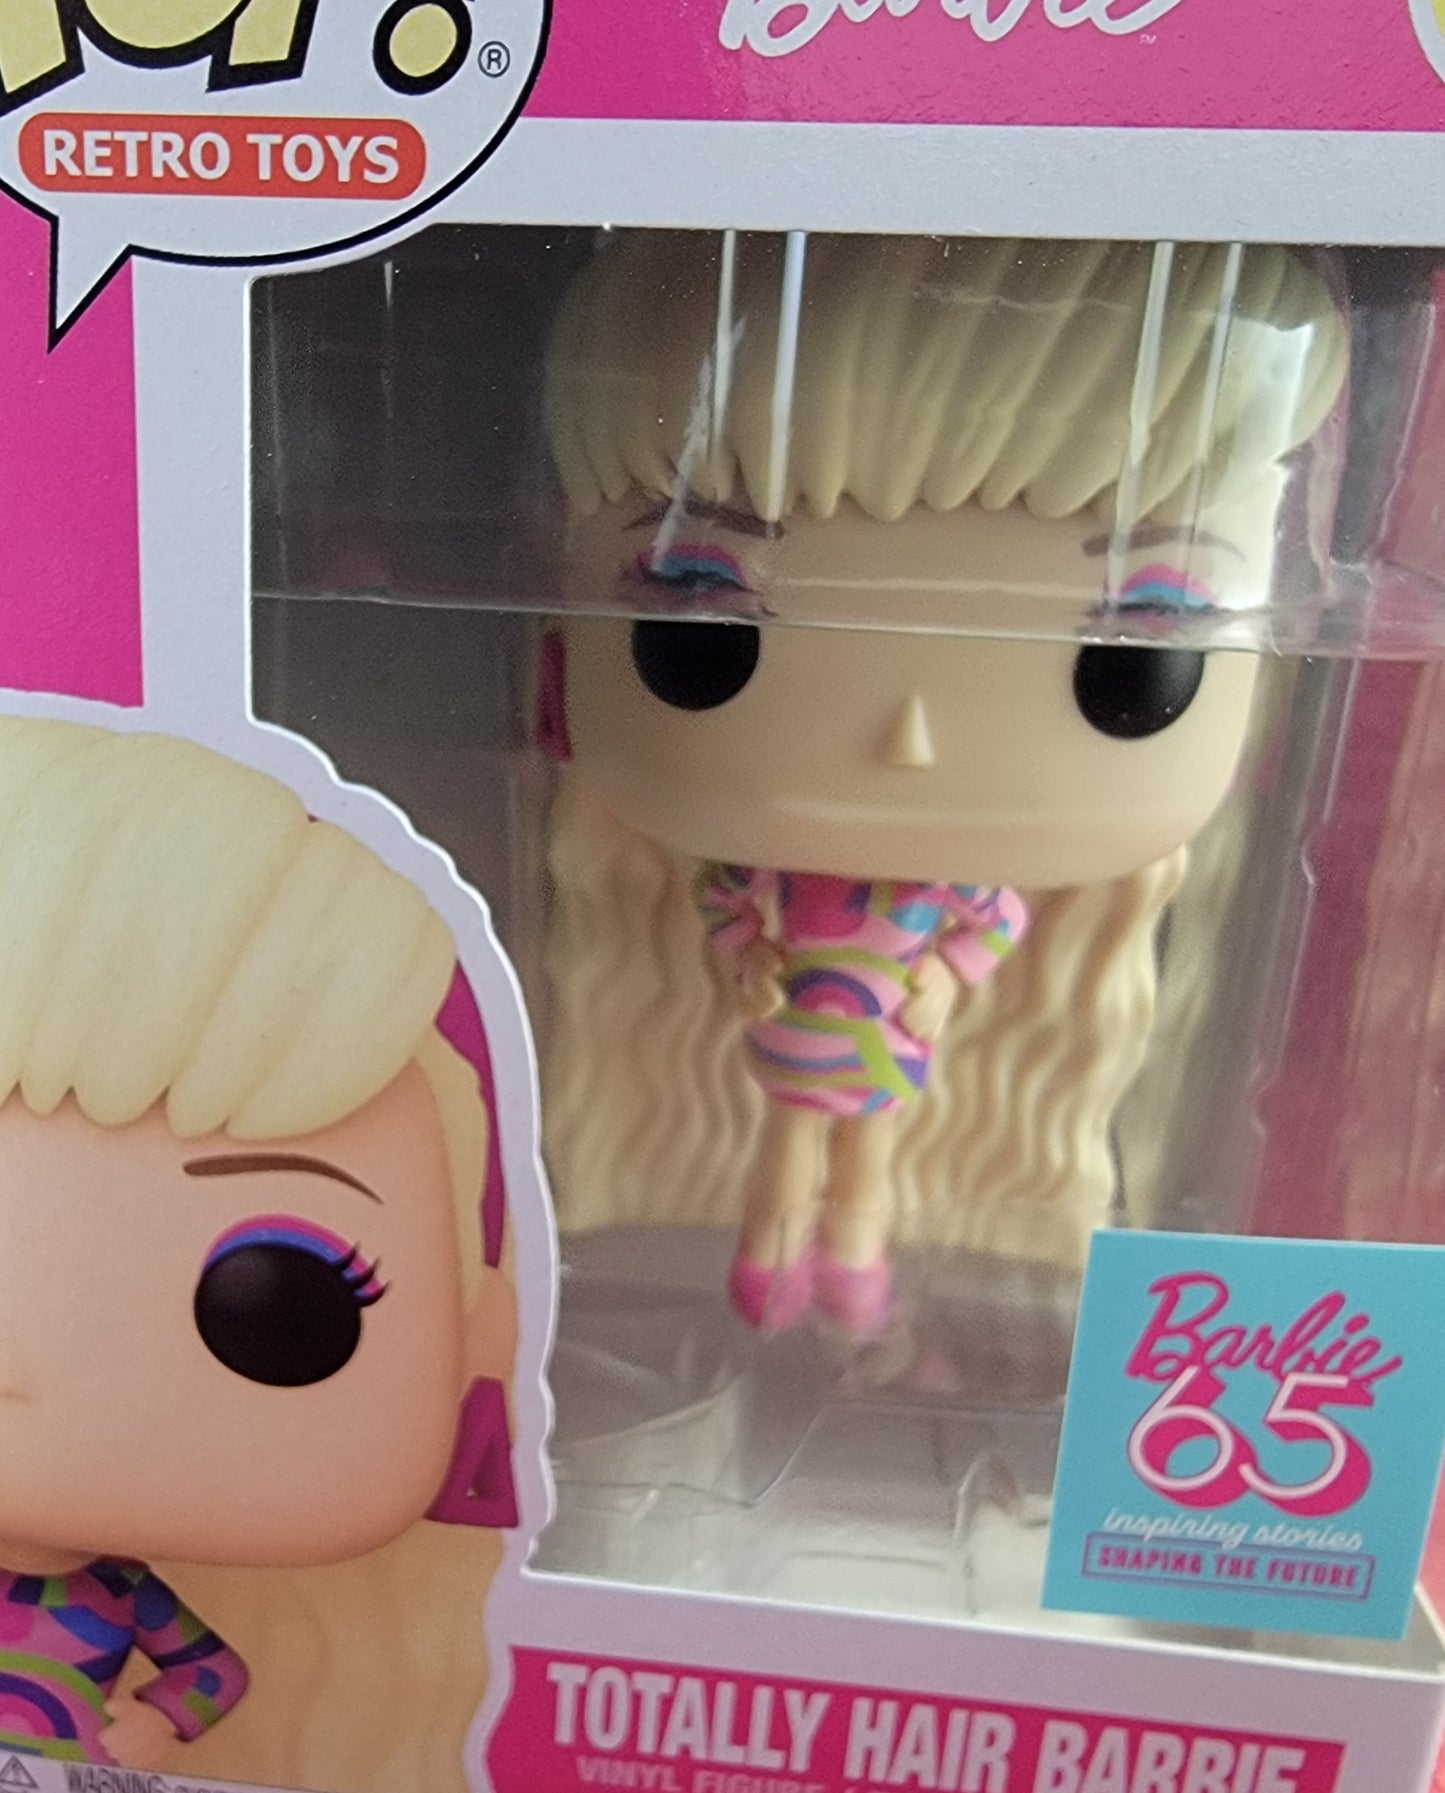 Totally hair barbie funko # 123 (nib)
With pop protector